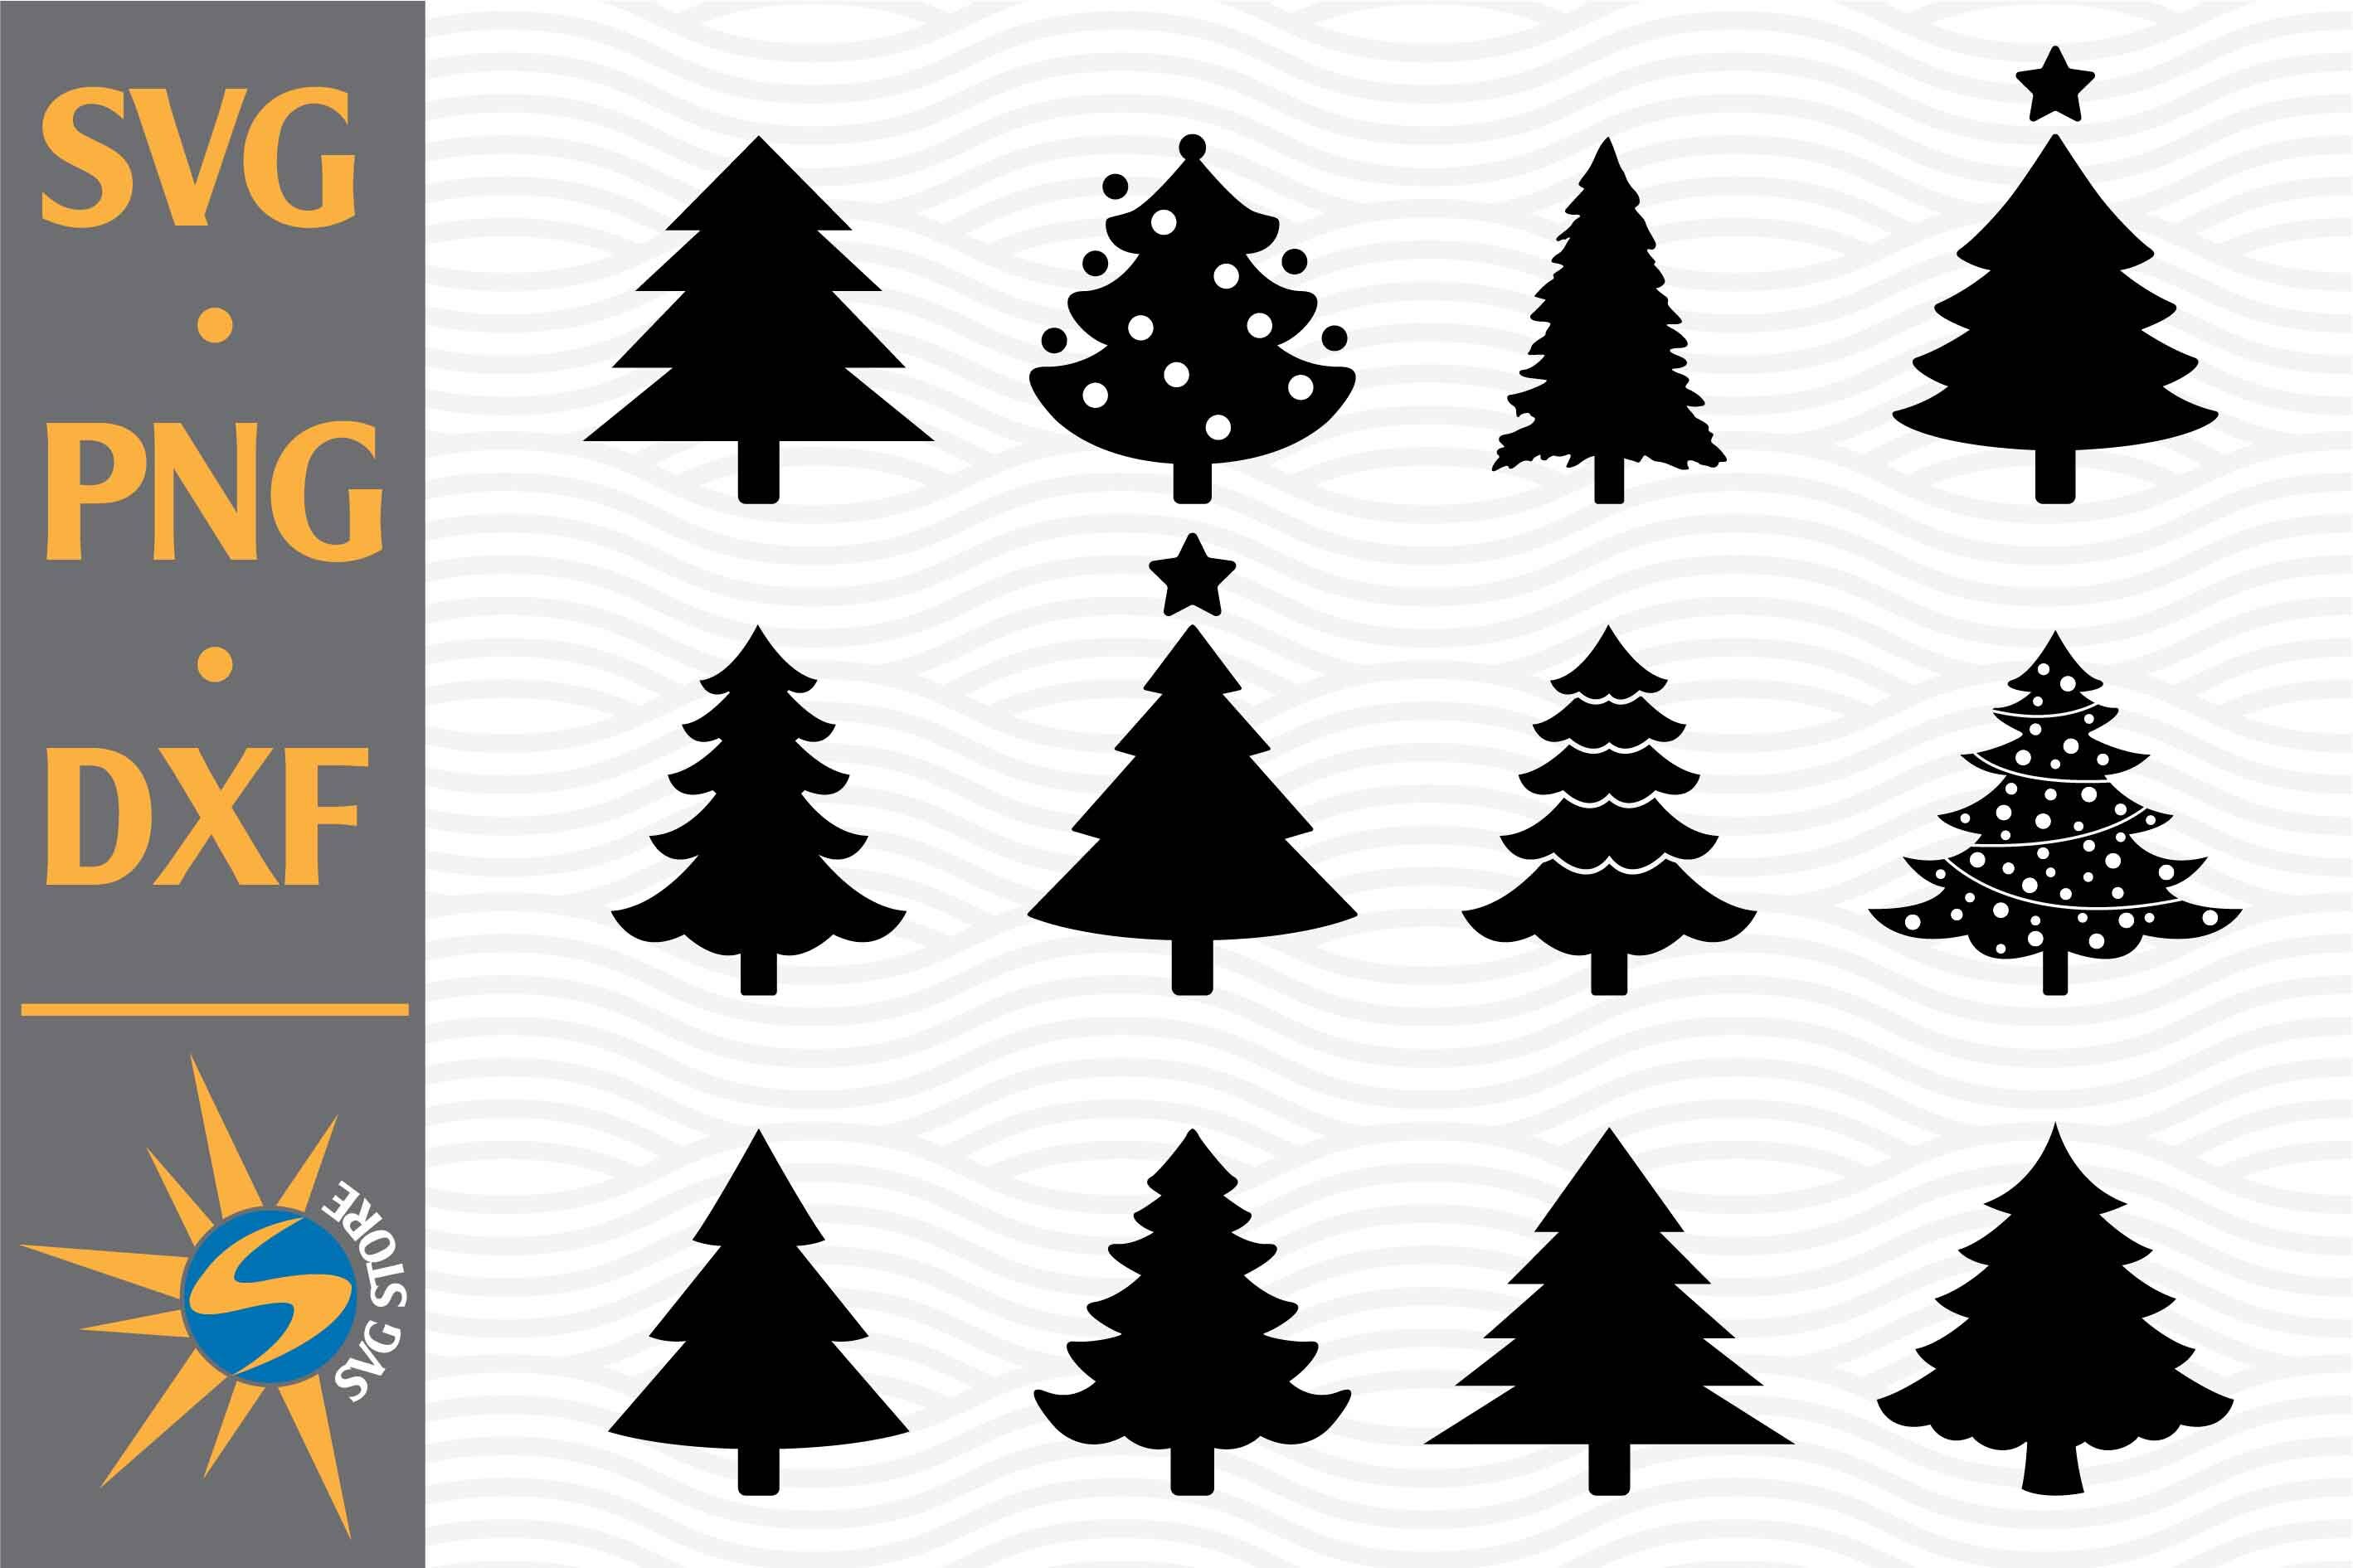 Christmas Tree SVG, PNG, DXF Digital Files Include By SVGStoreShop ...